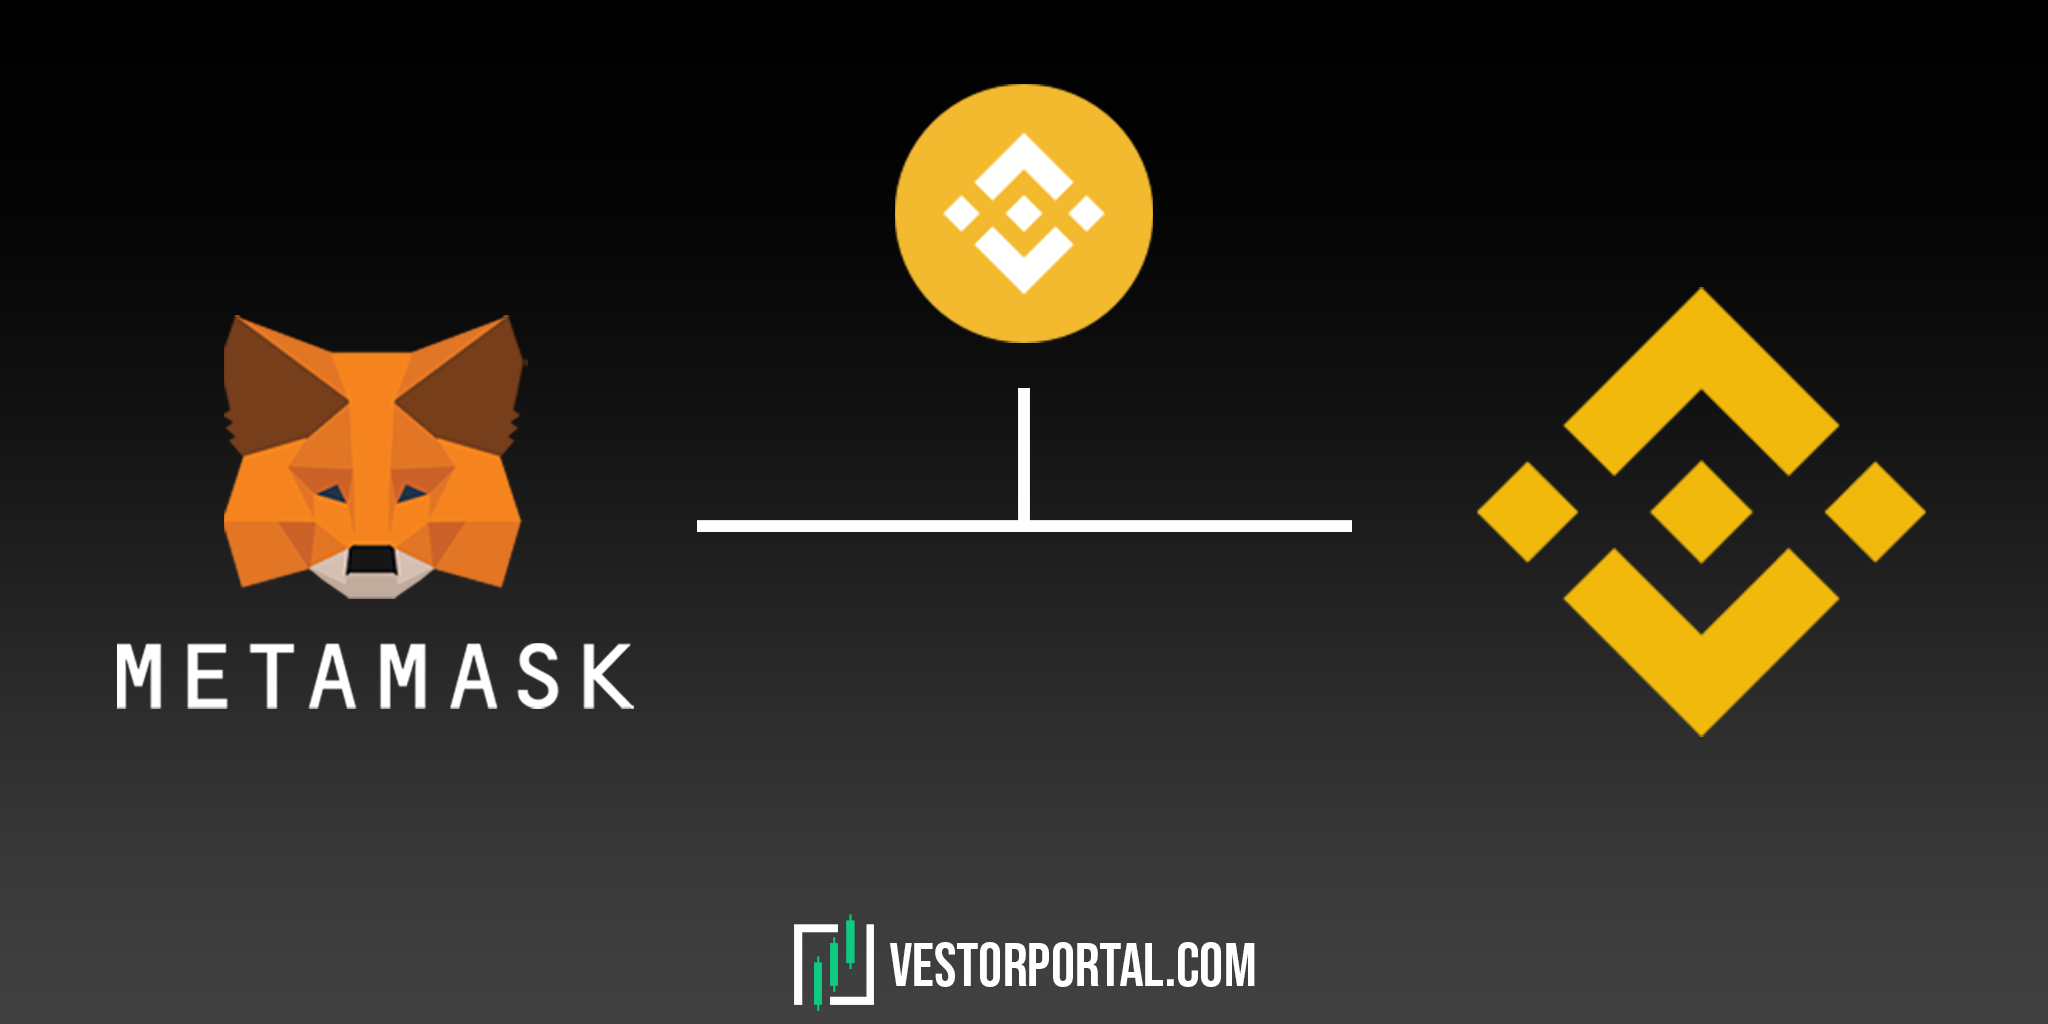 How to deposit BNB from MetaMask to Binance?